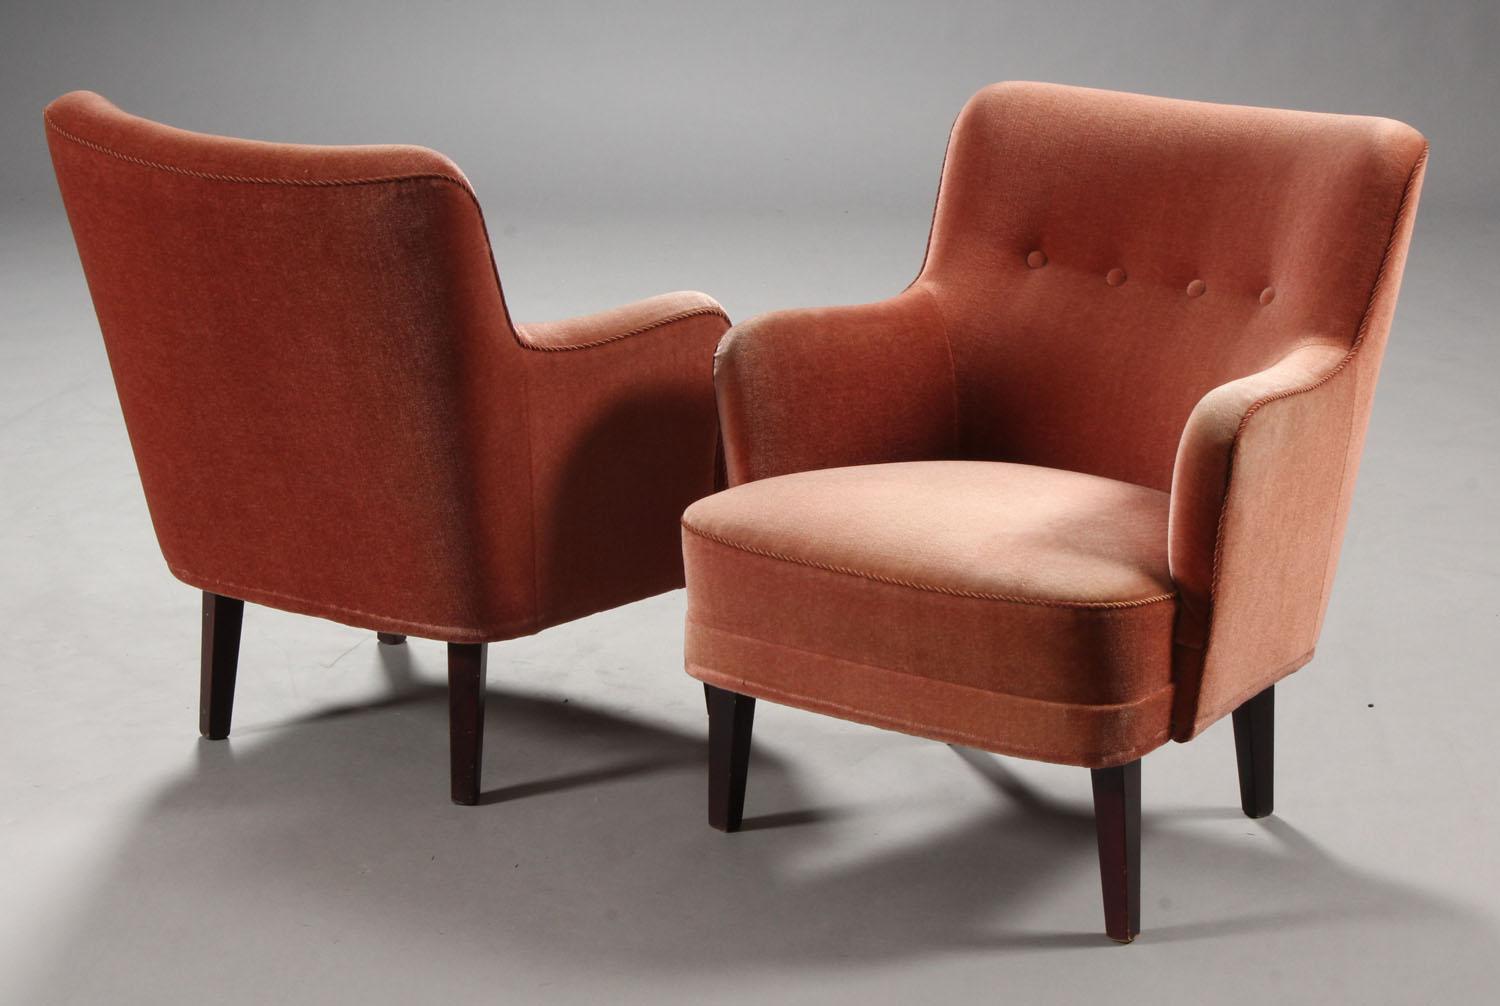 Scandinavian Modern Pair of Small Rose-Colored Armchairs